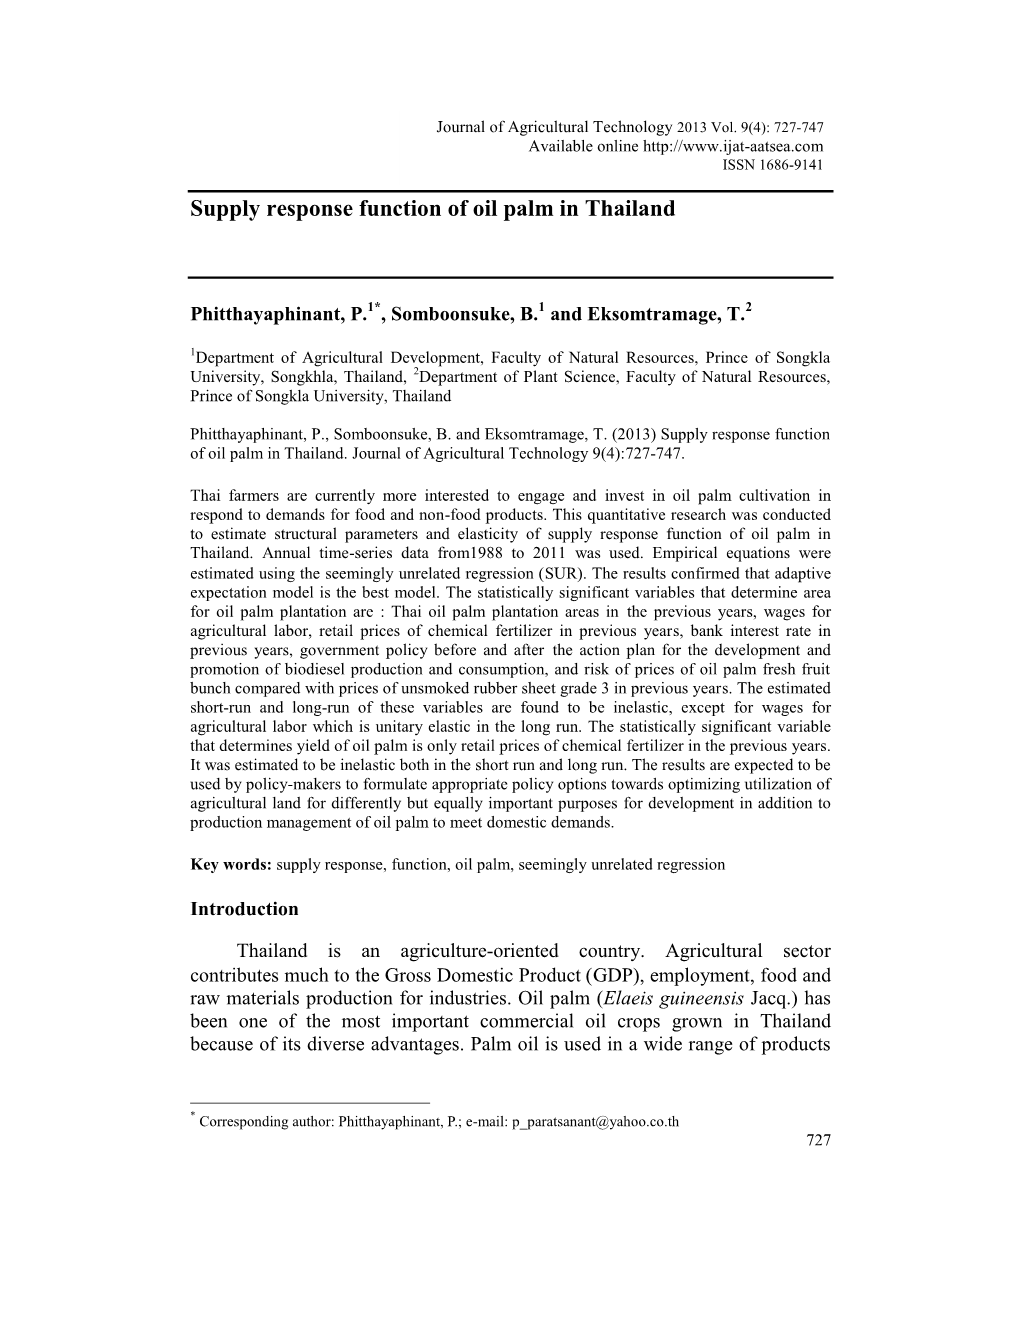 Supply Response Function of Oil Palm in Thailand